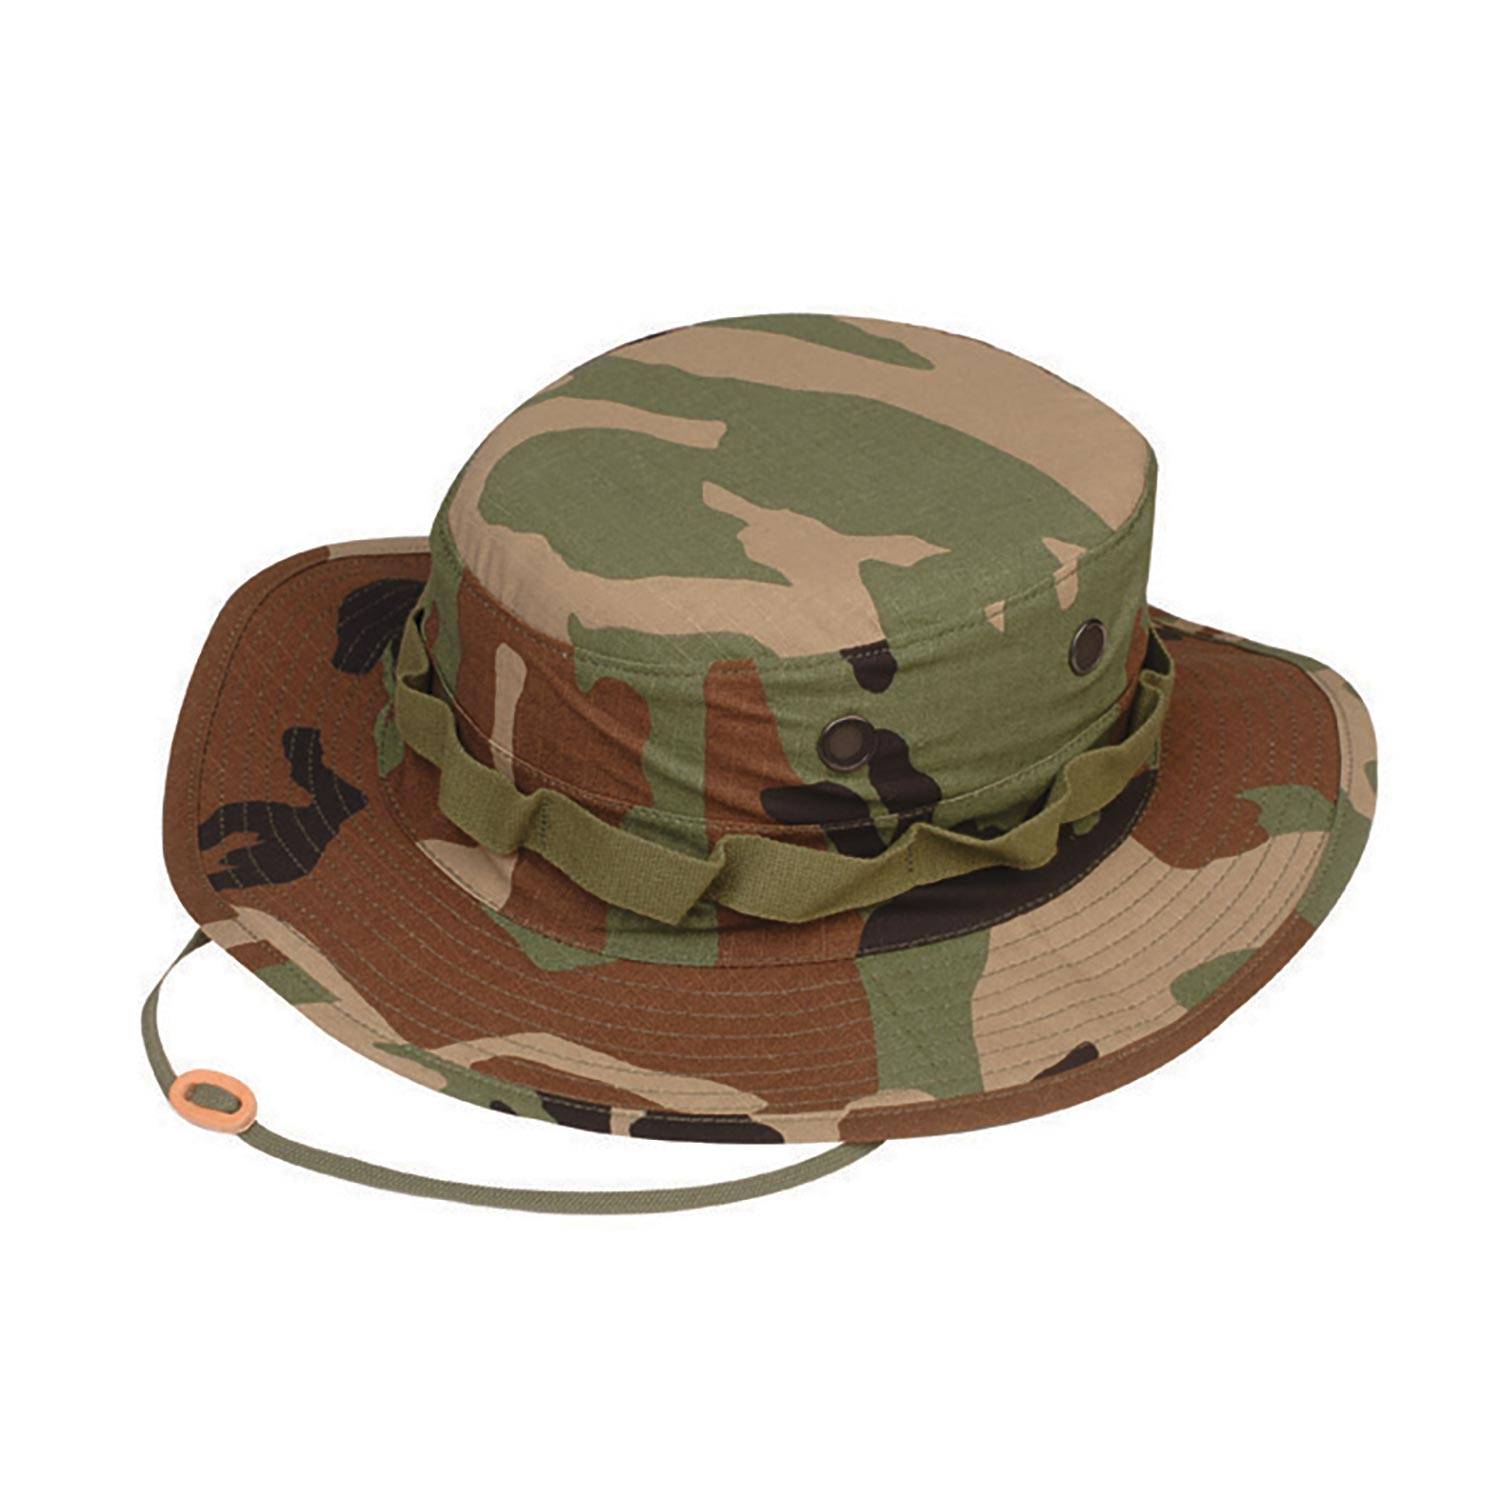 Rip Stop Boonie hat 6 Color Desert Storm Camo U.S.A free shipping new 7 3/4 